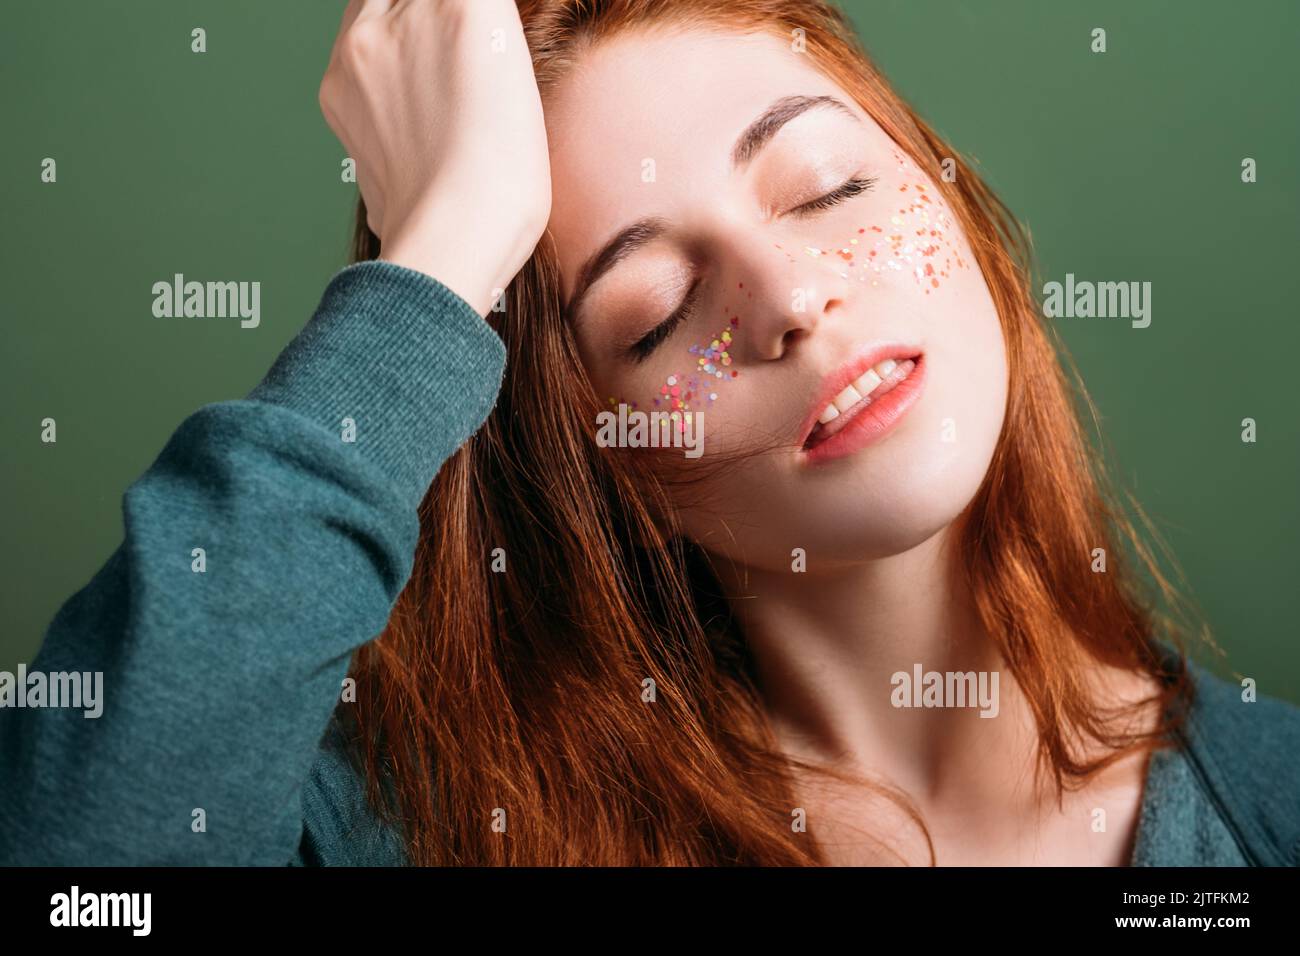 young female portrait party headache closed eyes Stock Photo